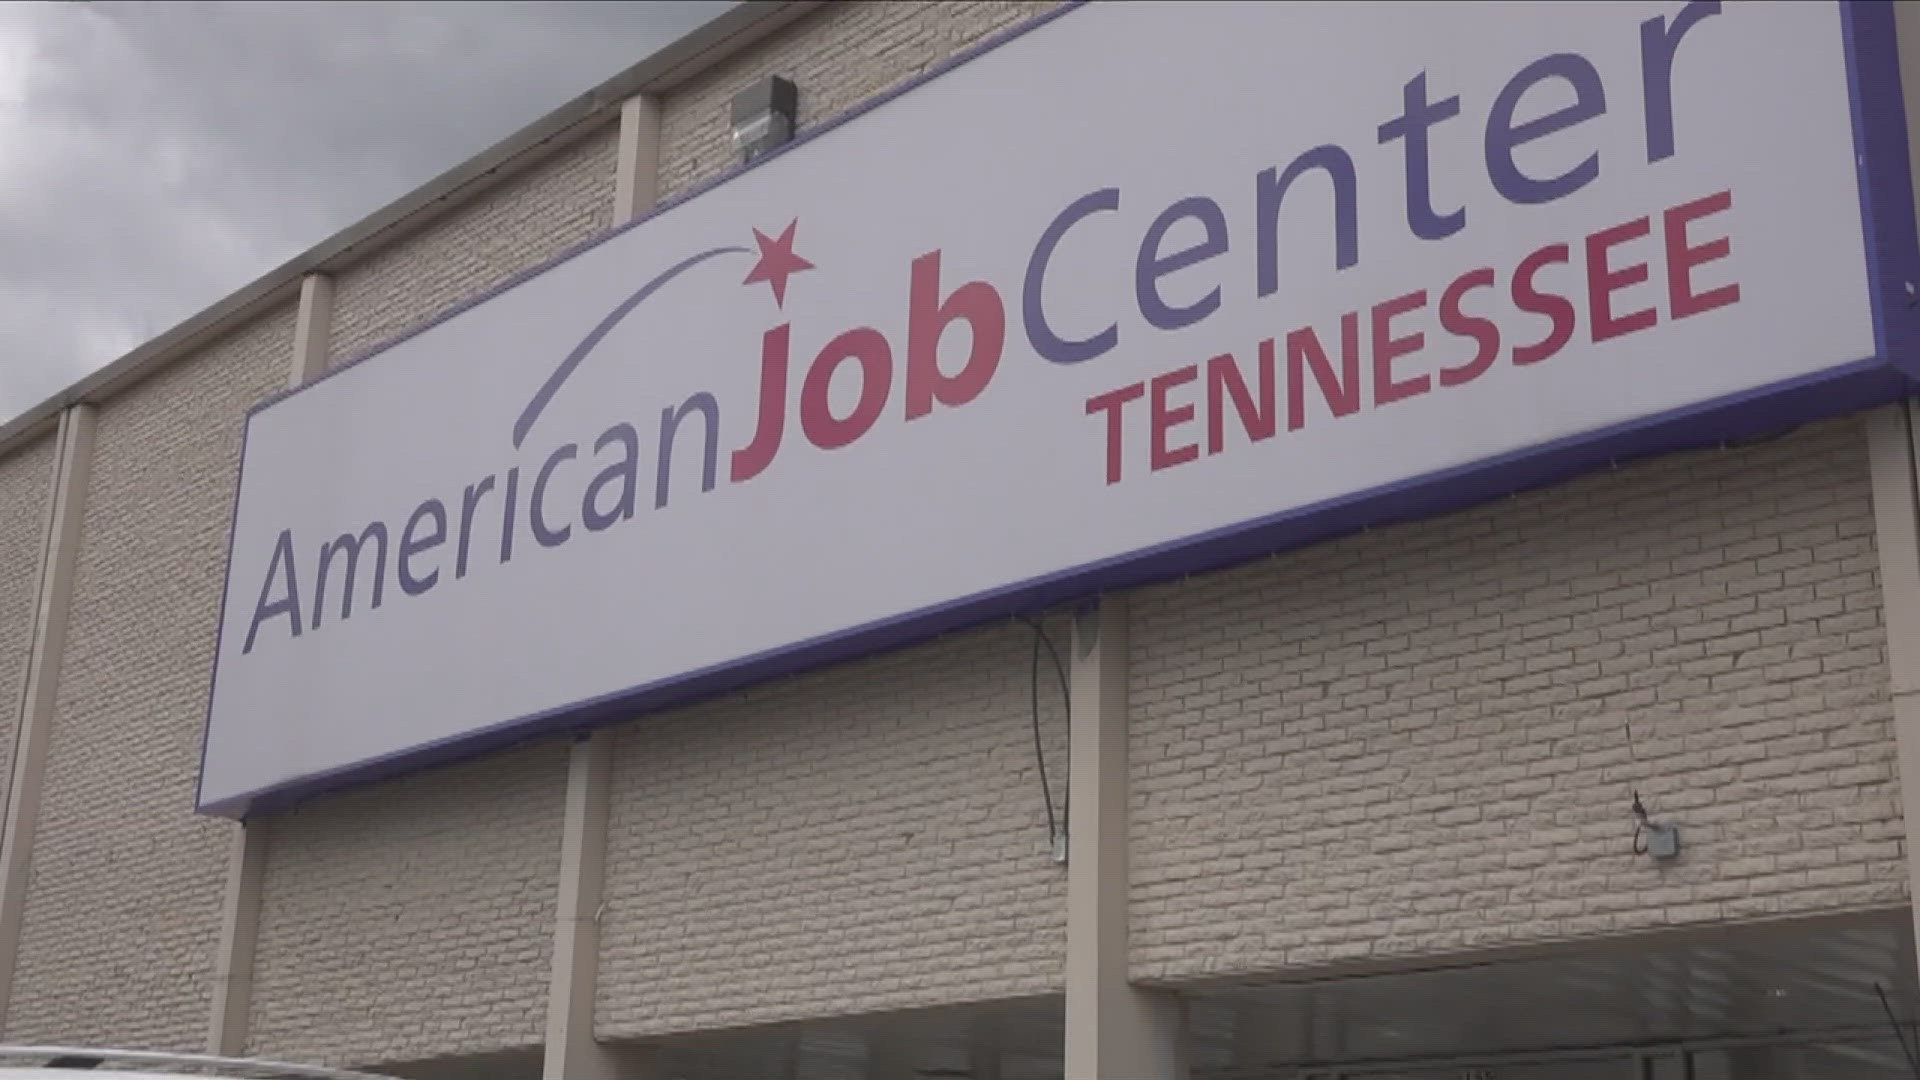 ABC24 went inside the American Job Center of Greater Memphis to look at how the organization helps people through the process of layoffs.